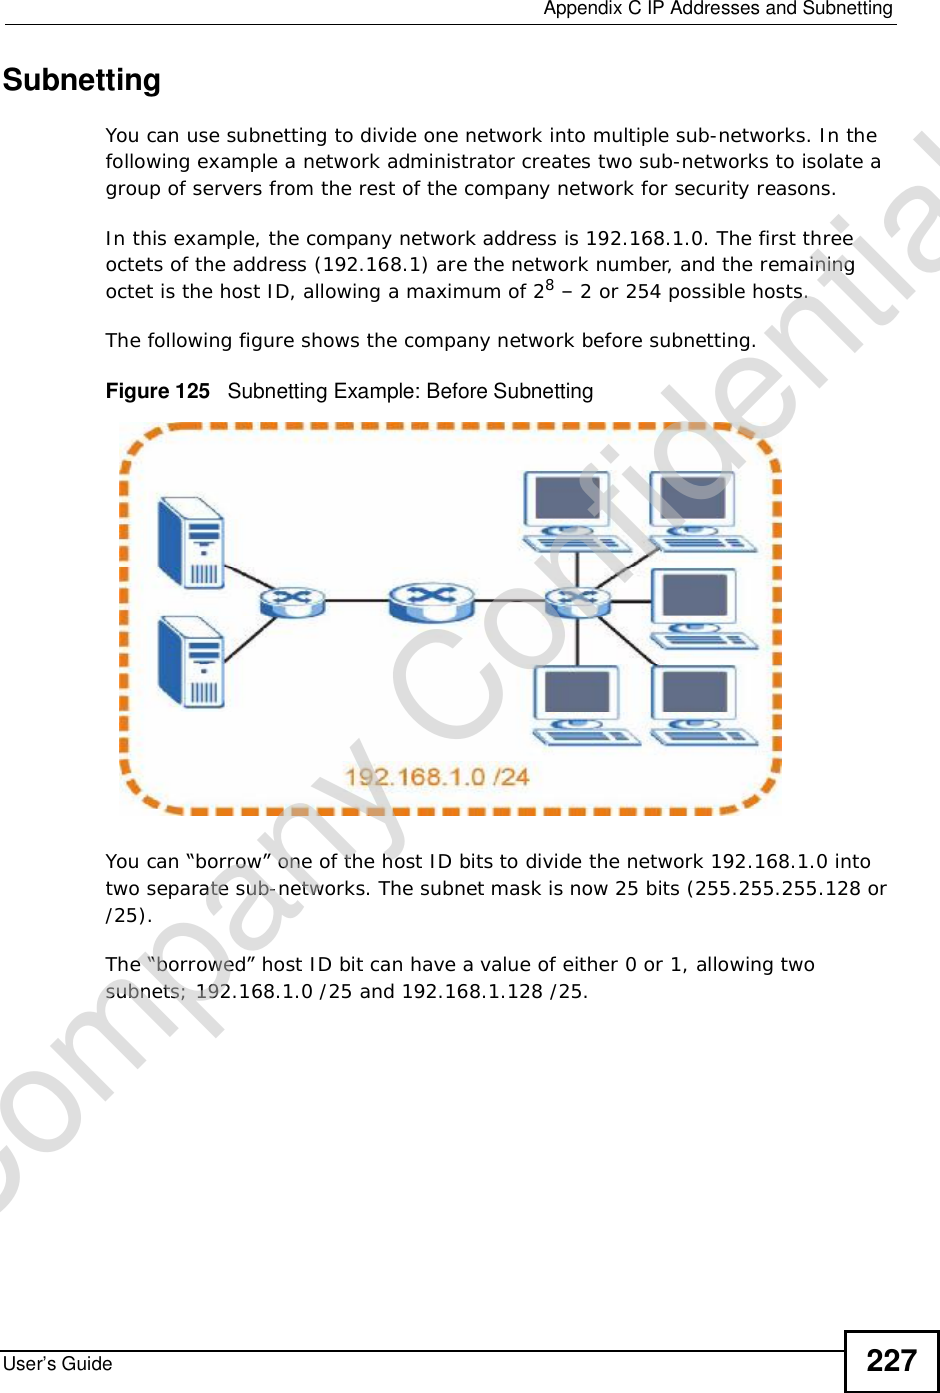  Appendix CIP Addresses and SubnettingUser’s Guide 227SubnettingYou can use subnetting to divide one network into multiple sub-networks. In the following example a network administrator creates two sub-networks to isolate a group of servers from the rest of the company network for security reasons.In this example, the company network address is 192.168.1.0. The first three octets of the address (192.168.1) are the network number, and the remaining octet is the host ID, allowing a maximum of 28 – 2 or 254 possible hosts.The following figure shows the company network before subnetting.  Figure 125   Subnetting Example: Before SubnettingYou can “borrow” one of the host ID bits to divide the network 192.168.1.0 into two separate sub-networks. The subnet mask is now 25 bits (255.255.255.128 or /25).The “borrowed” host ID bit can have a value of either 0 or 1, allowing two subnets; 192.168.1.0 /25 and 192.168.1.128 /25. Company Confidential